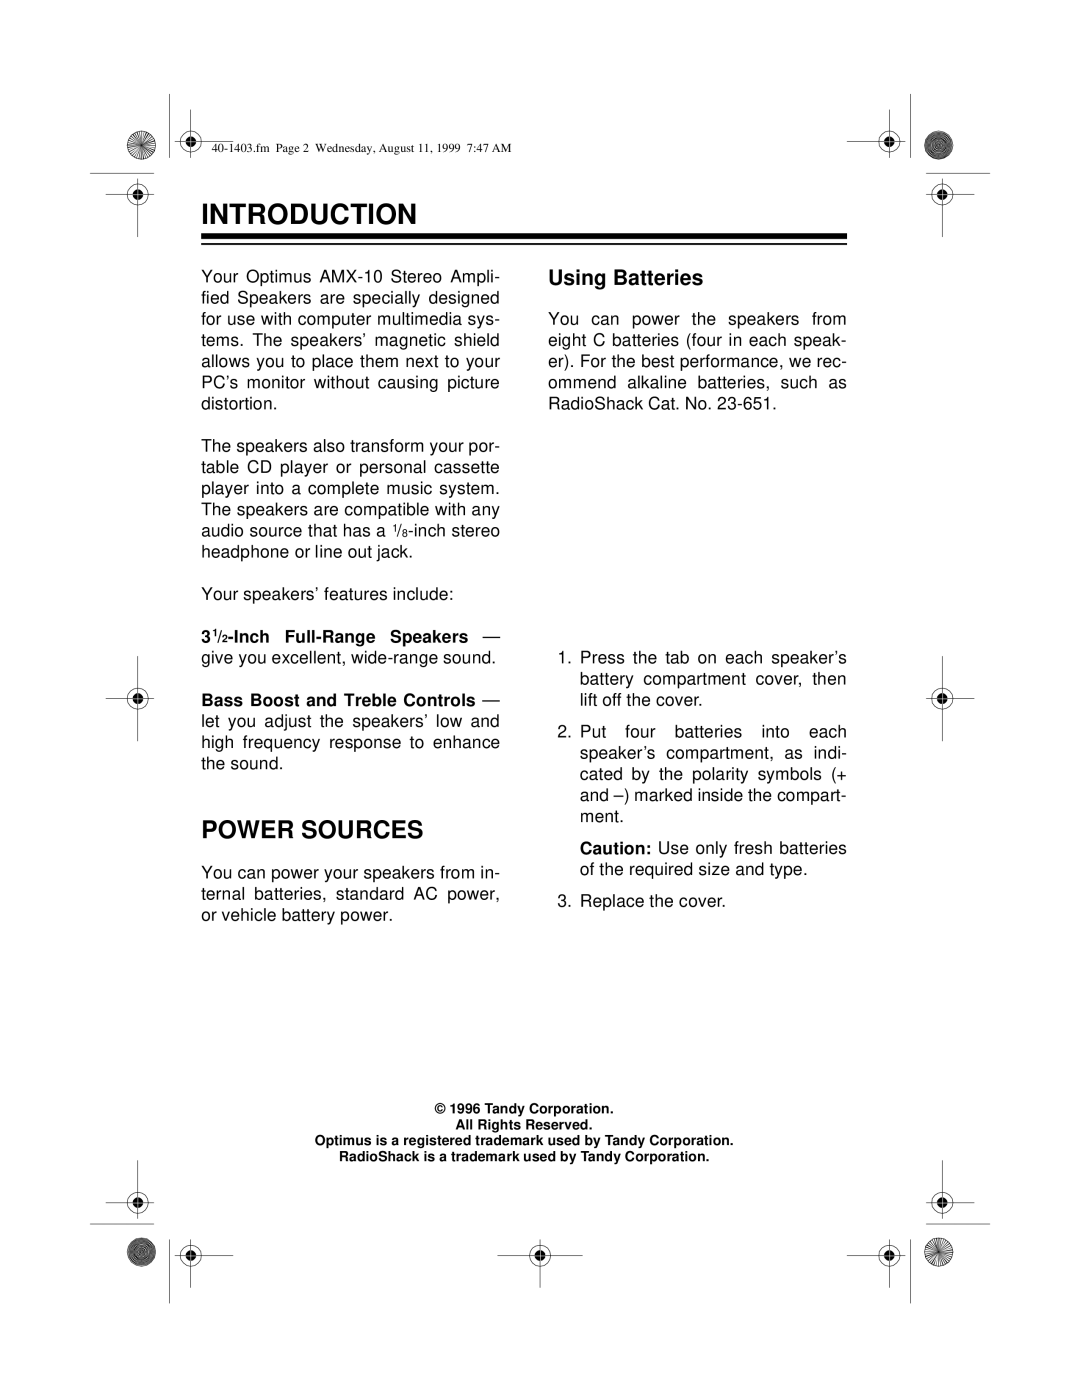 Optimus 40-1403, AMX-10 owner manual Introduction, Power Sources, Using Batteries, 31/2-Inch Full-RangeSpeakers 